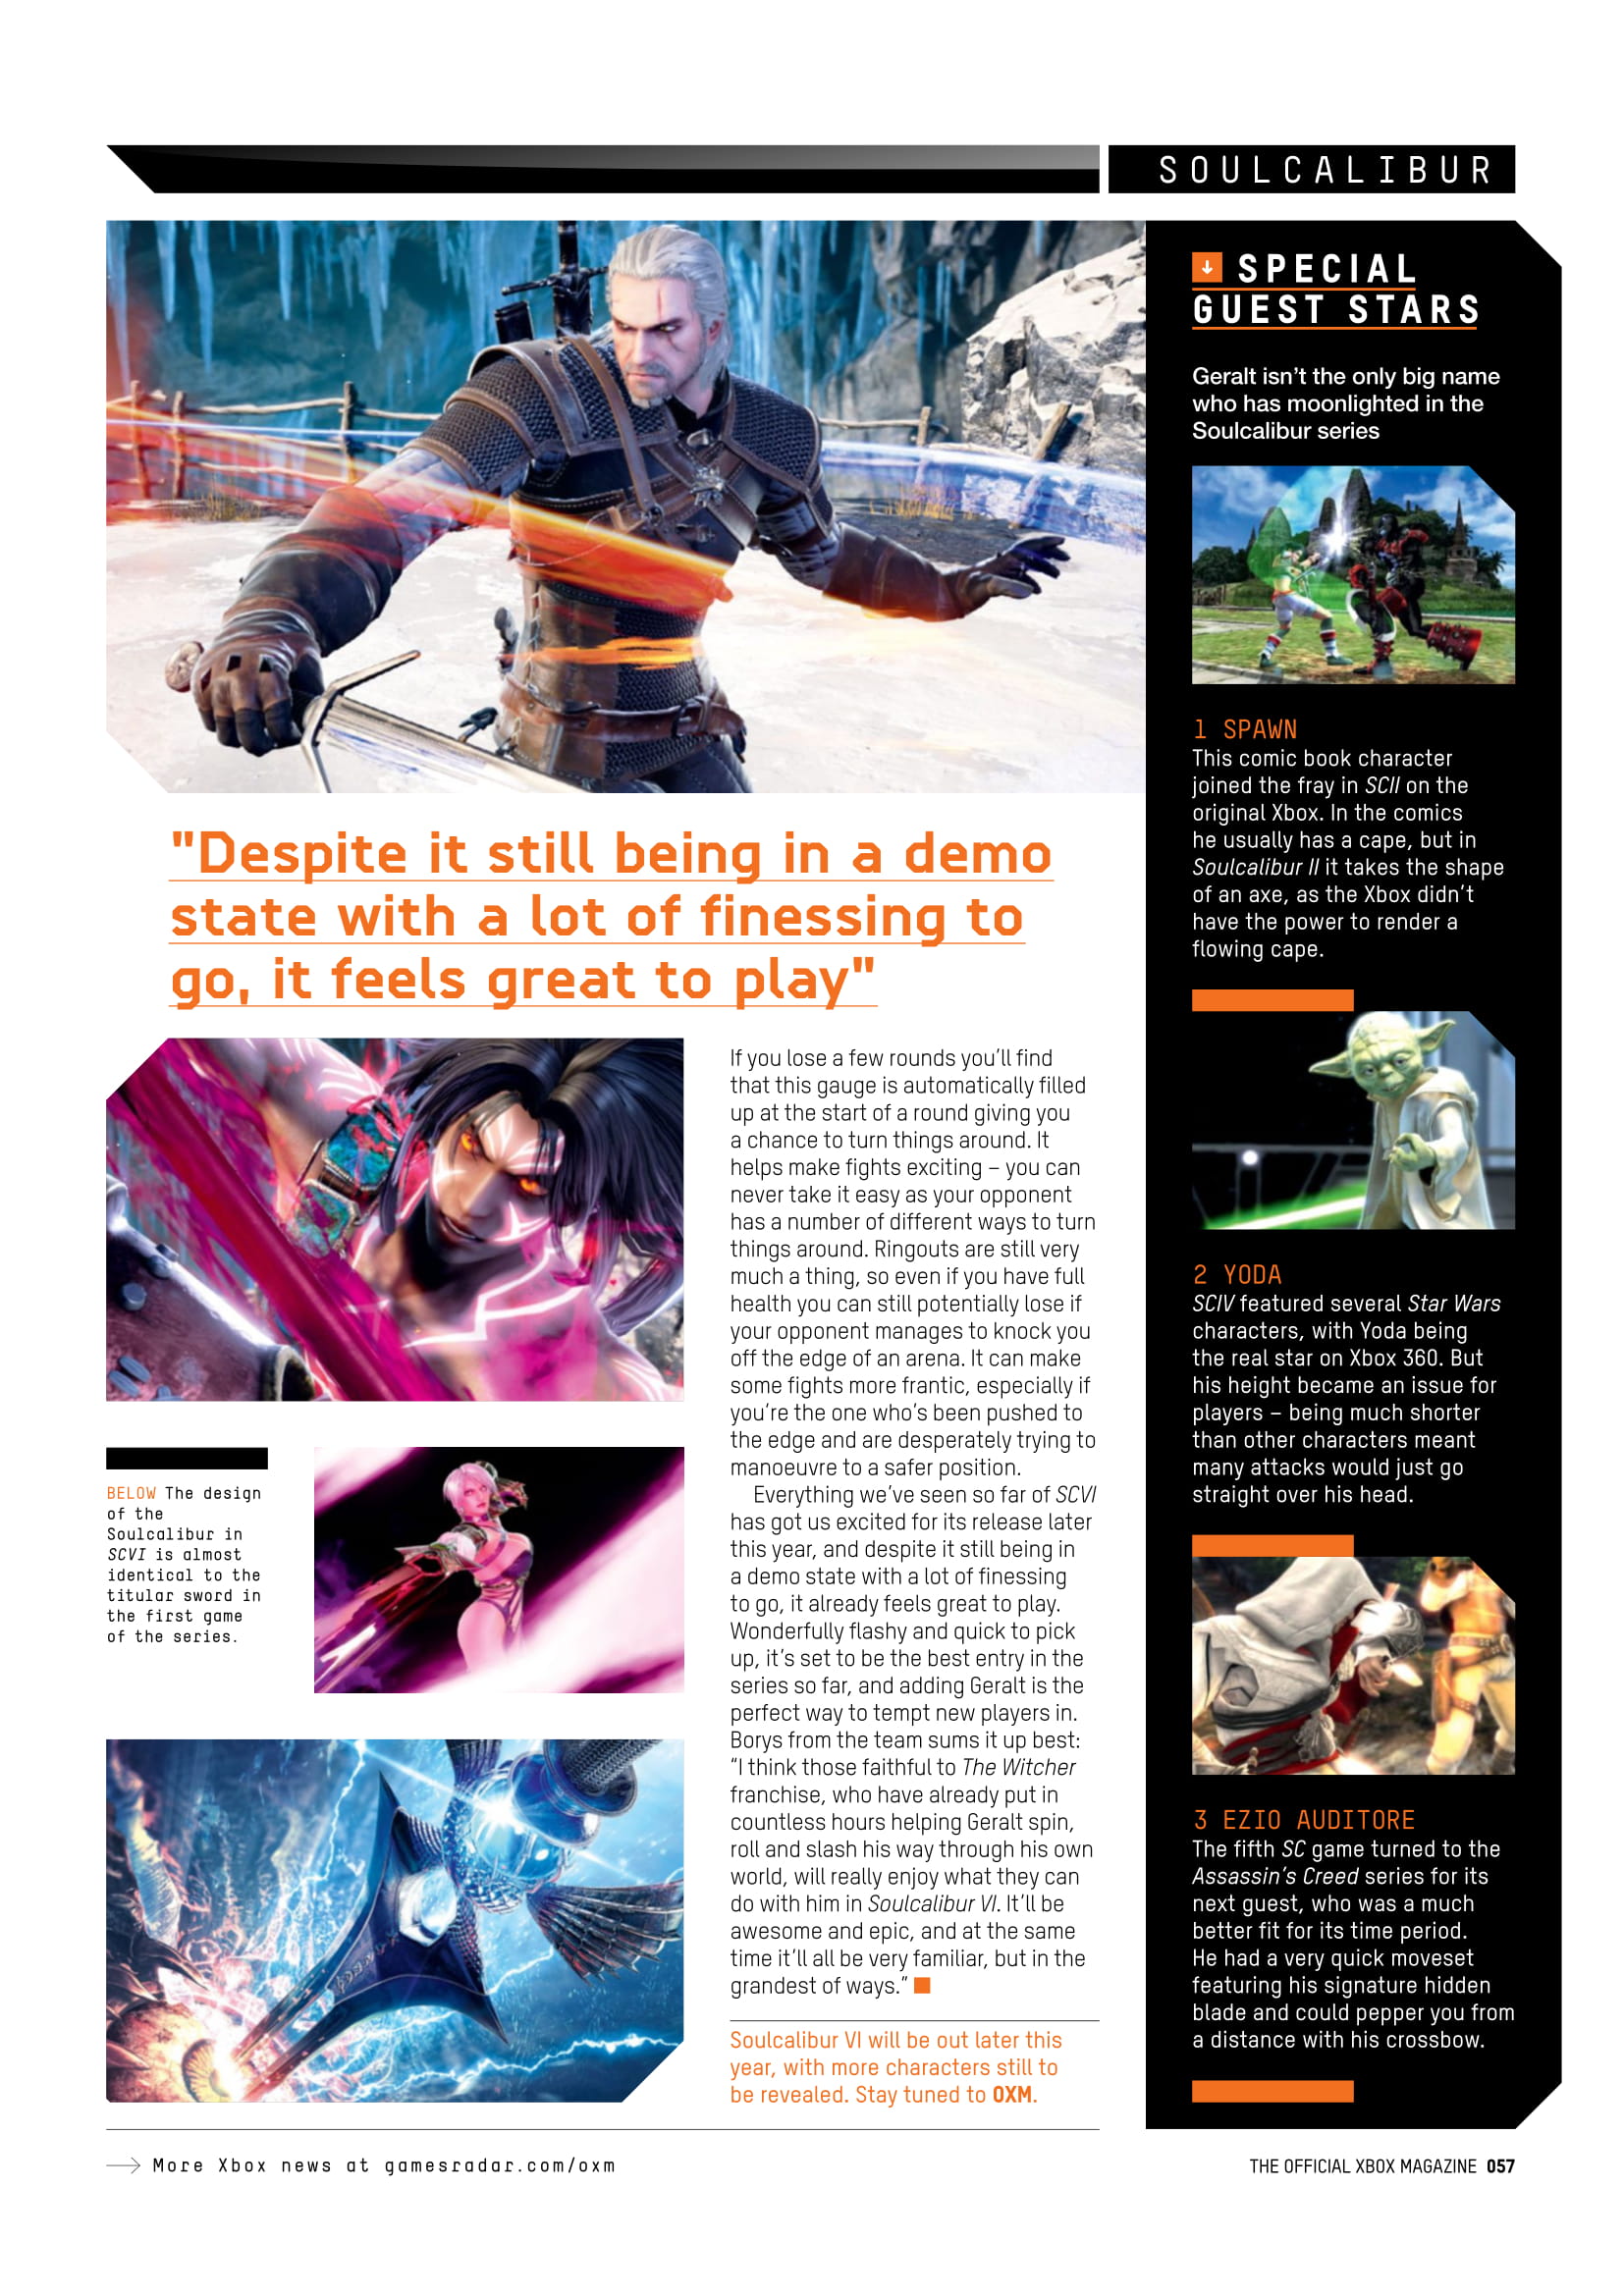 Xbox The Official Magazine - May 2018-057.jpg